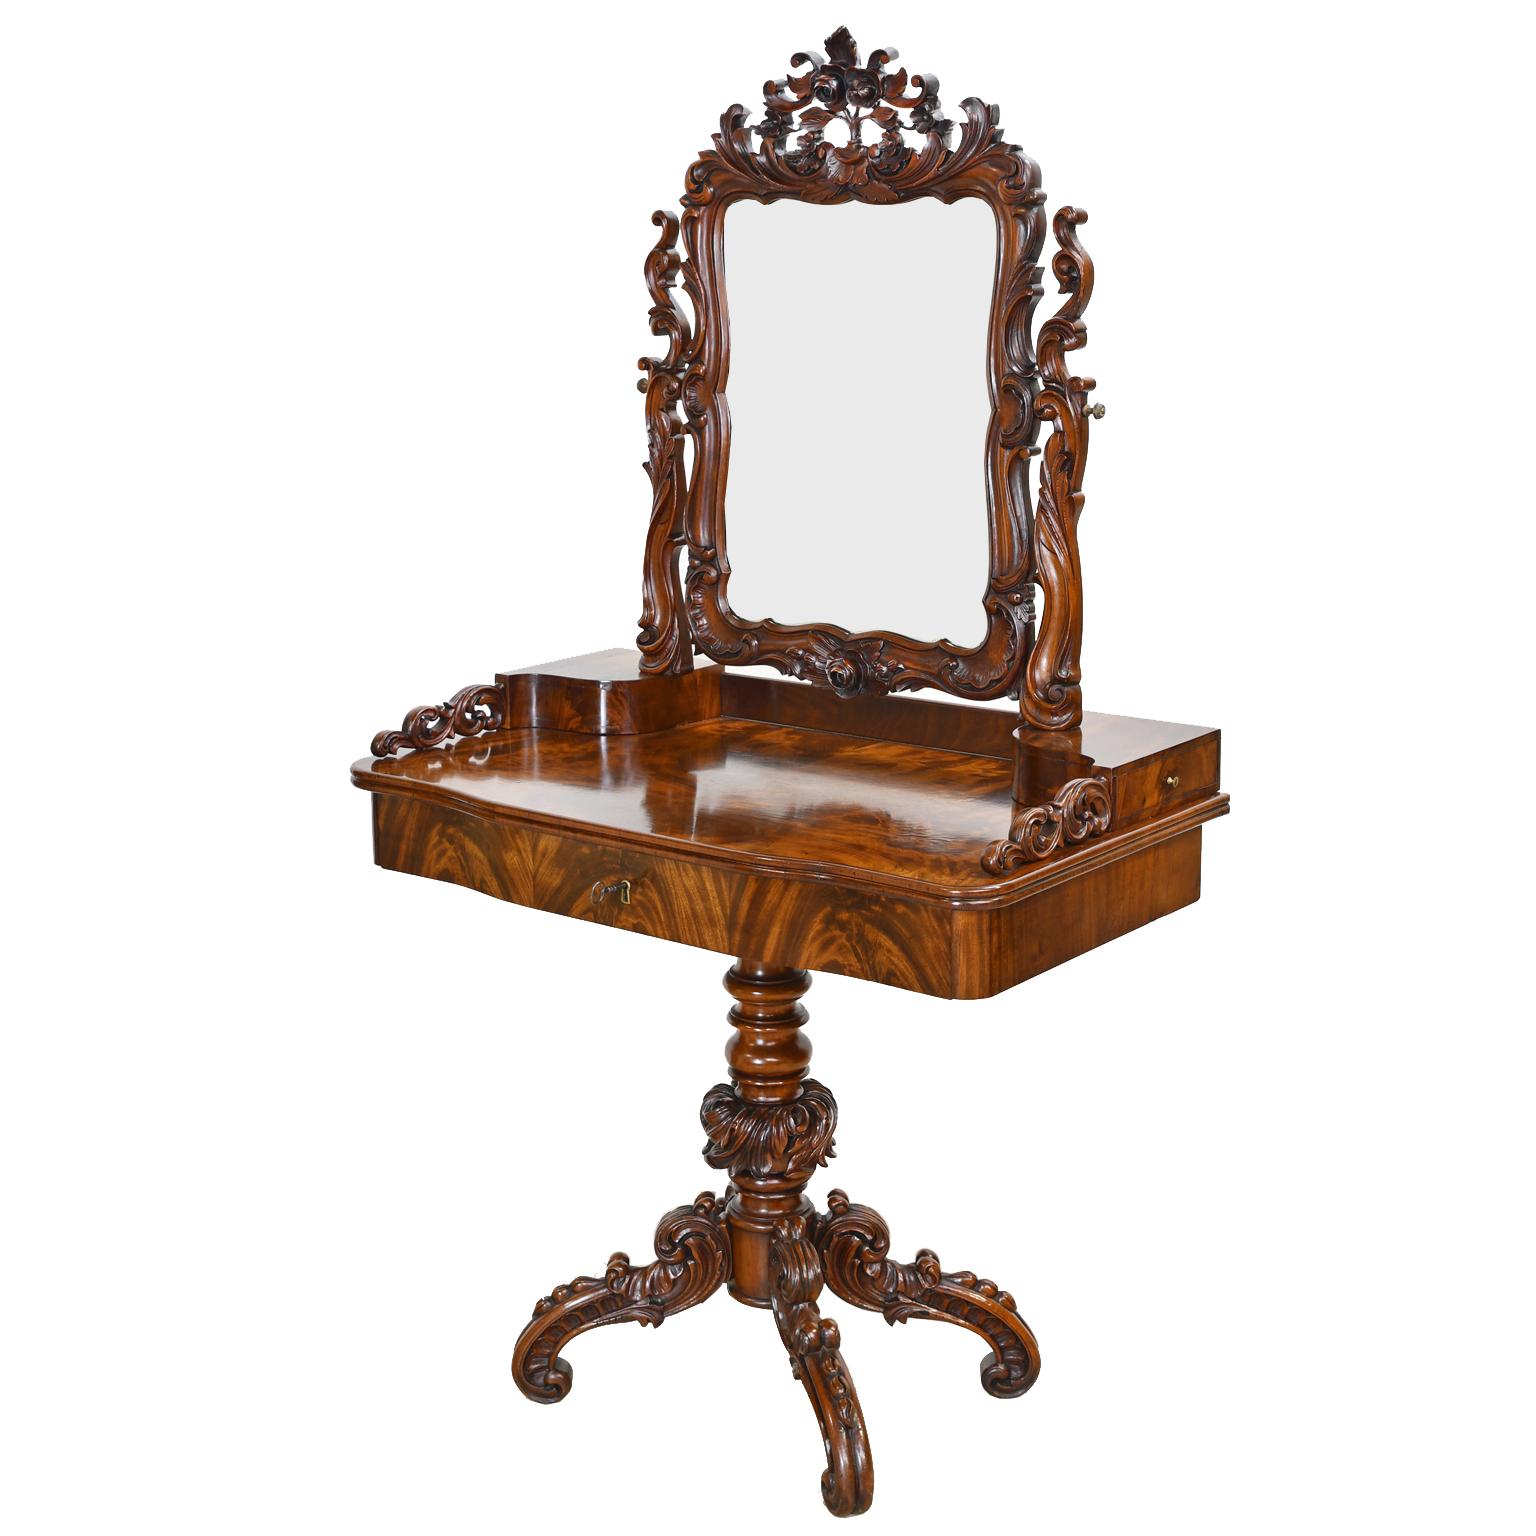 An exquisite Karl Johan dressing table or vanity in fine West Indies mahogany with elaborate floral and foliate rococo carvings along the mirror frame and center pedestal base. Offers a drawer on each side, and a center drawer on the apron. Comes